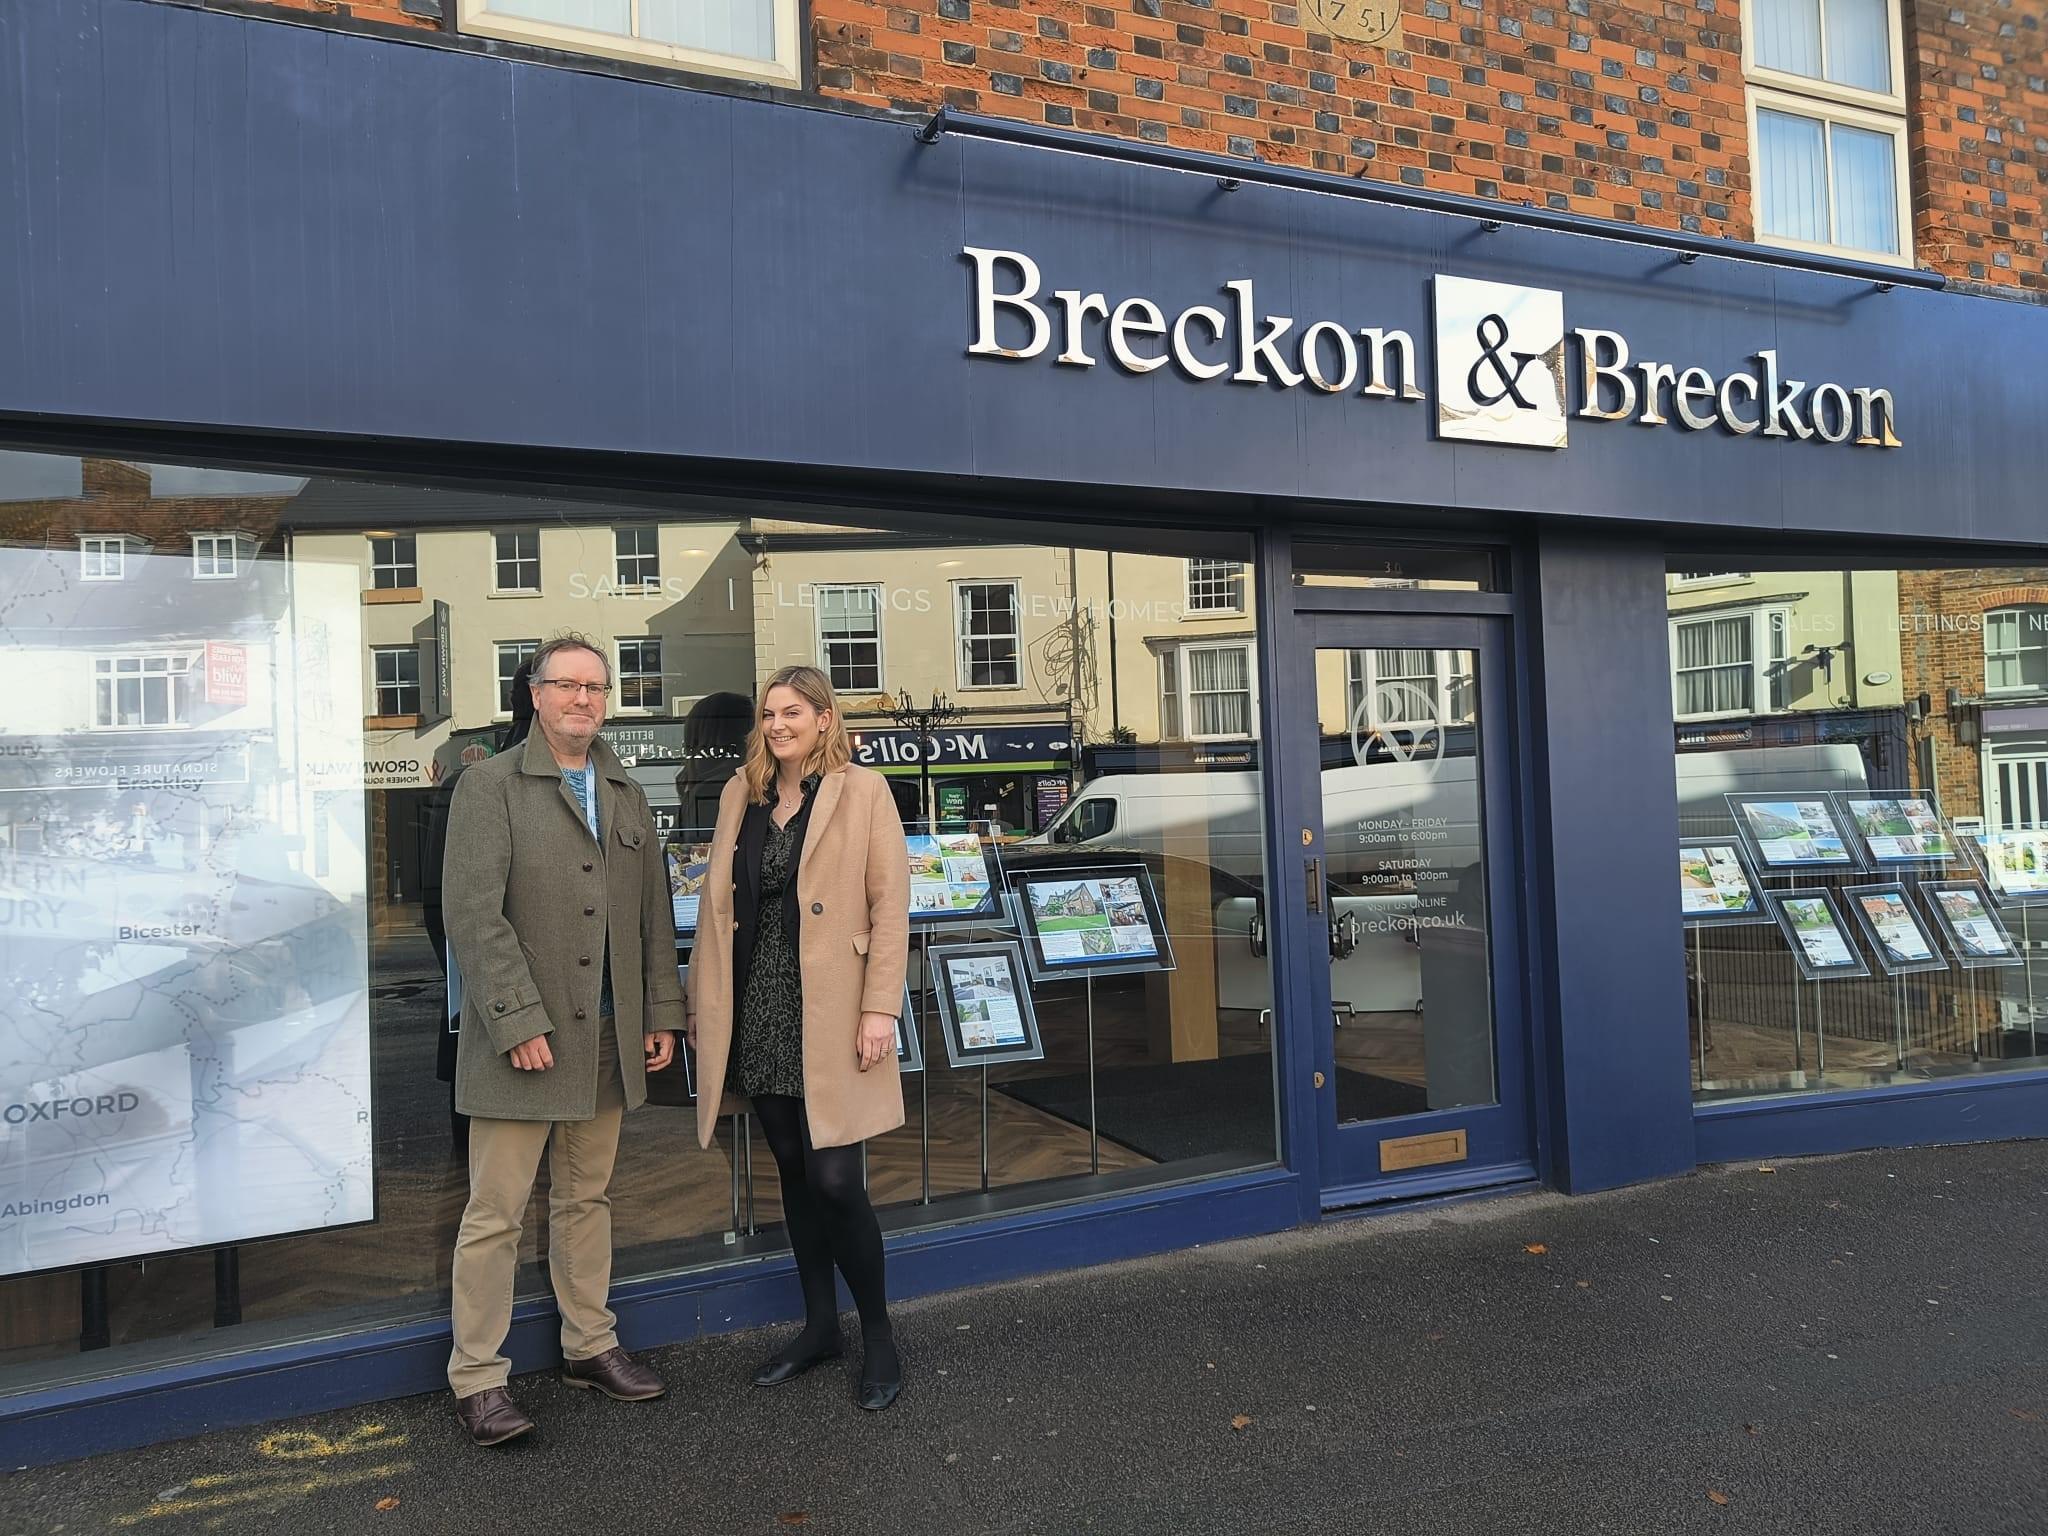 Michael Hewitt and Maxine Reynolds, Office Manager at Breckon and Breckon